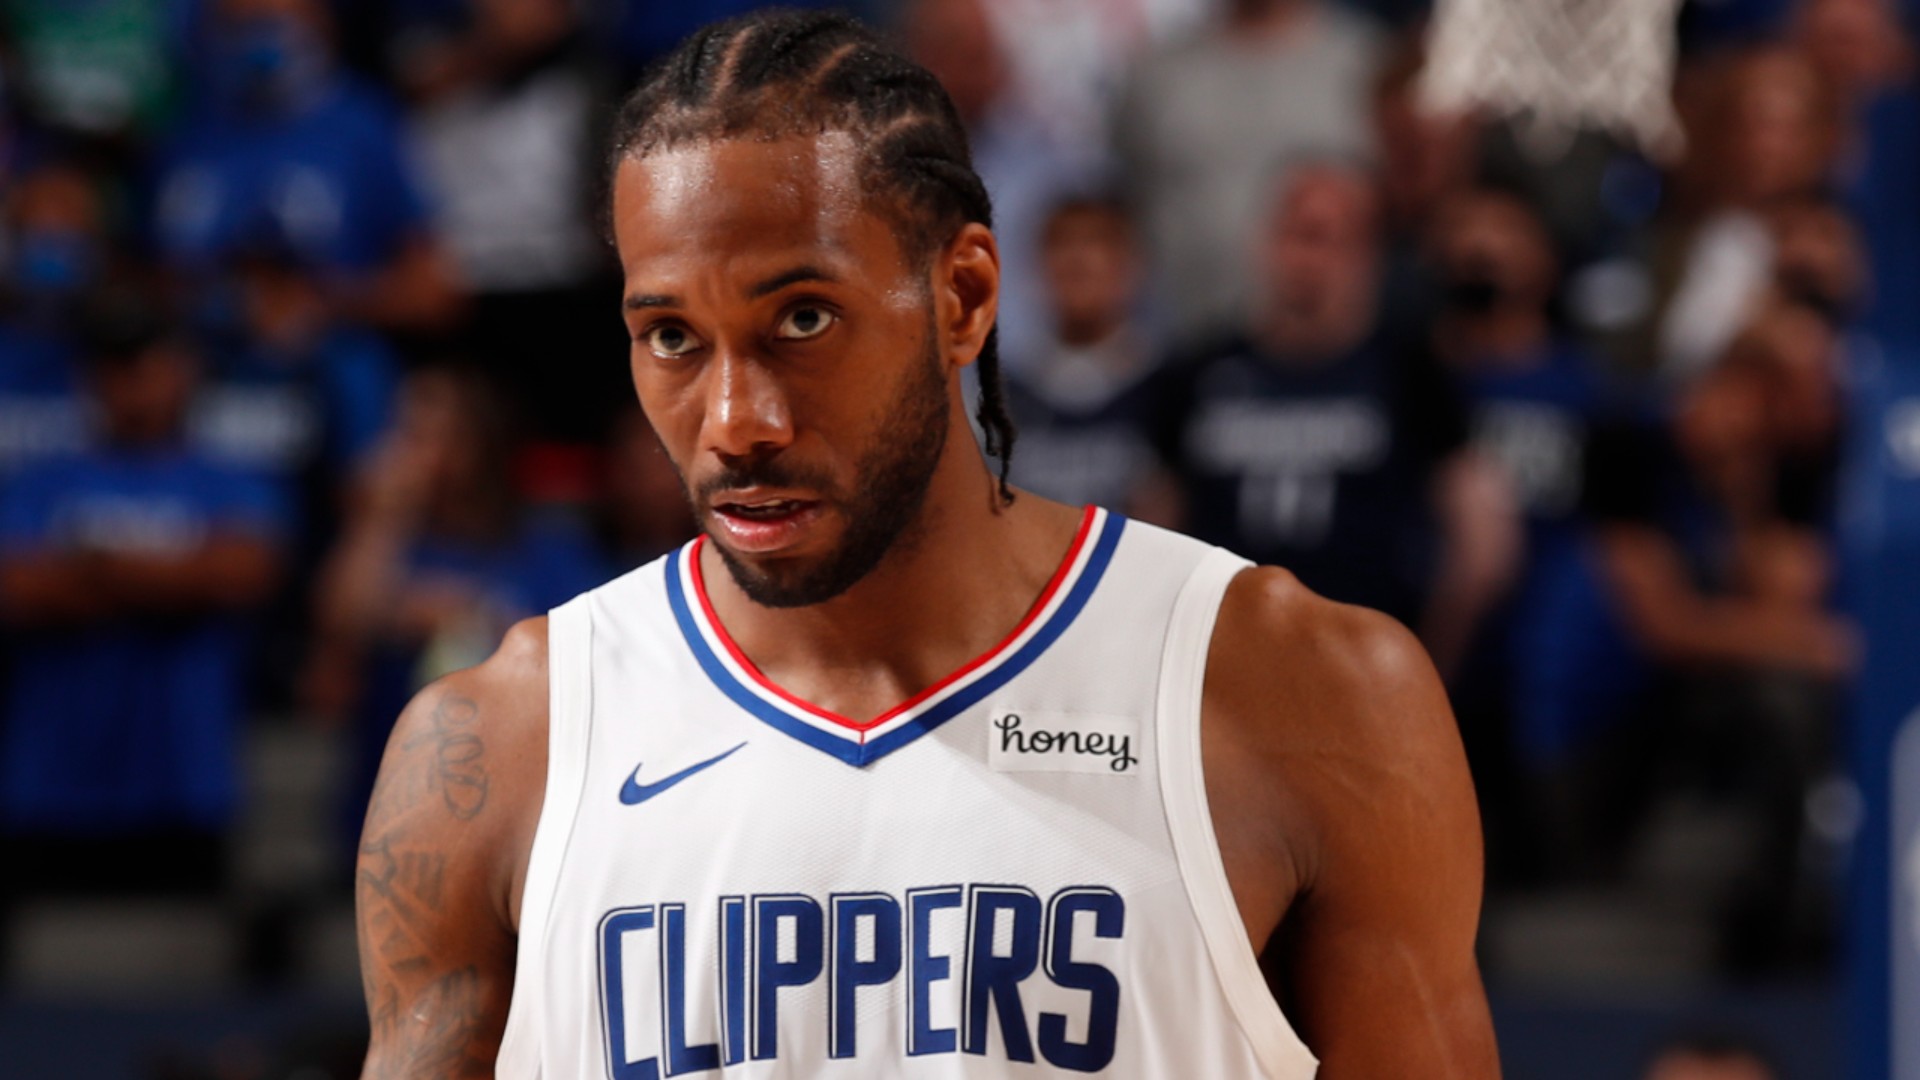 While a knee injury may keep him sidelined for the start of the 2021-22 season, the Clippers now know Kawhi Leonard is sticking around.